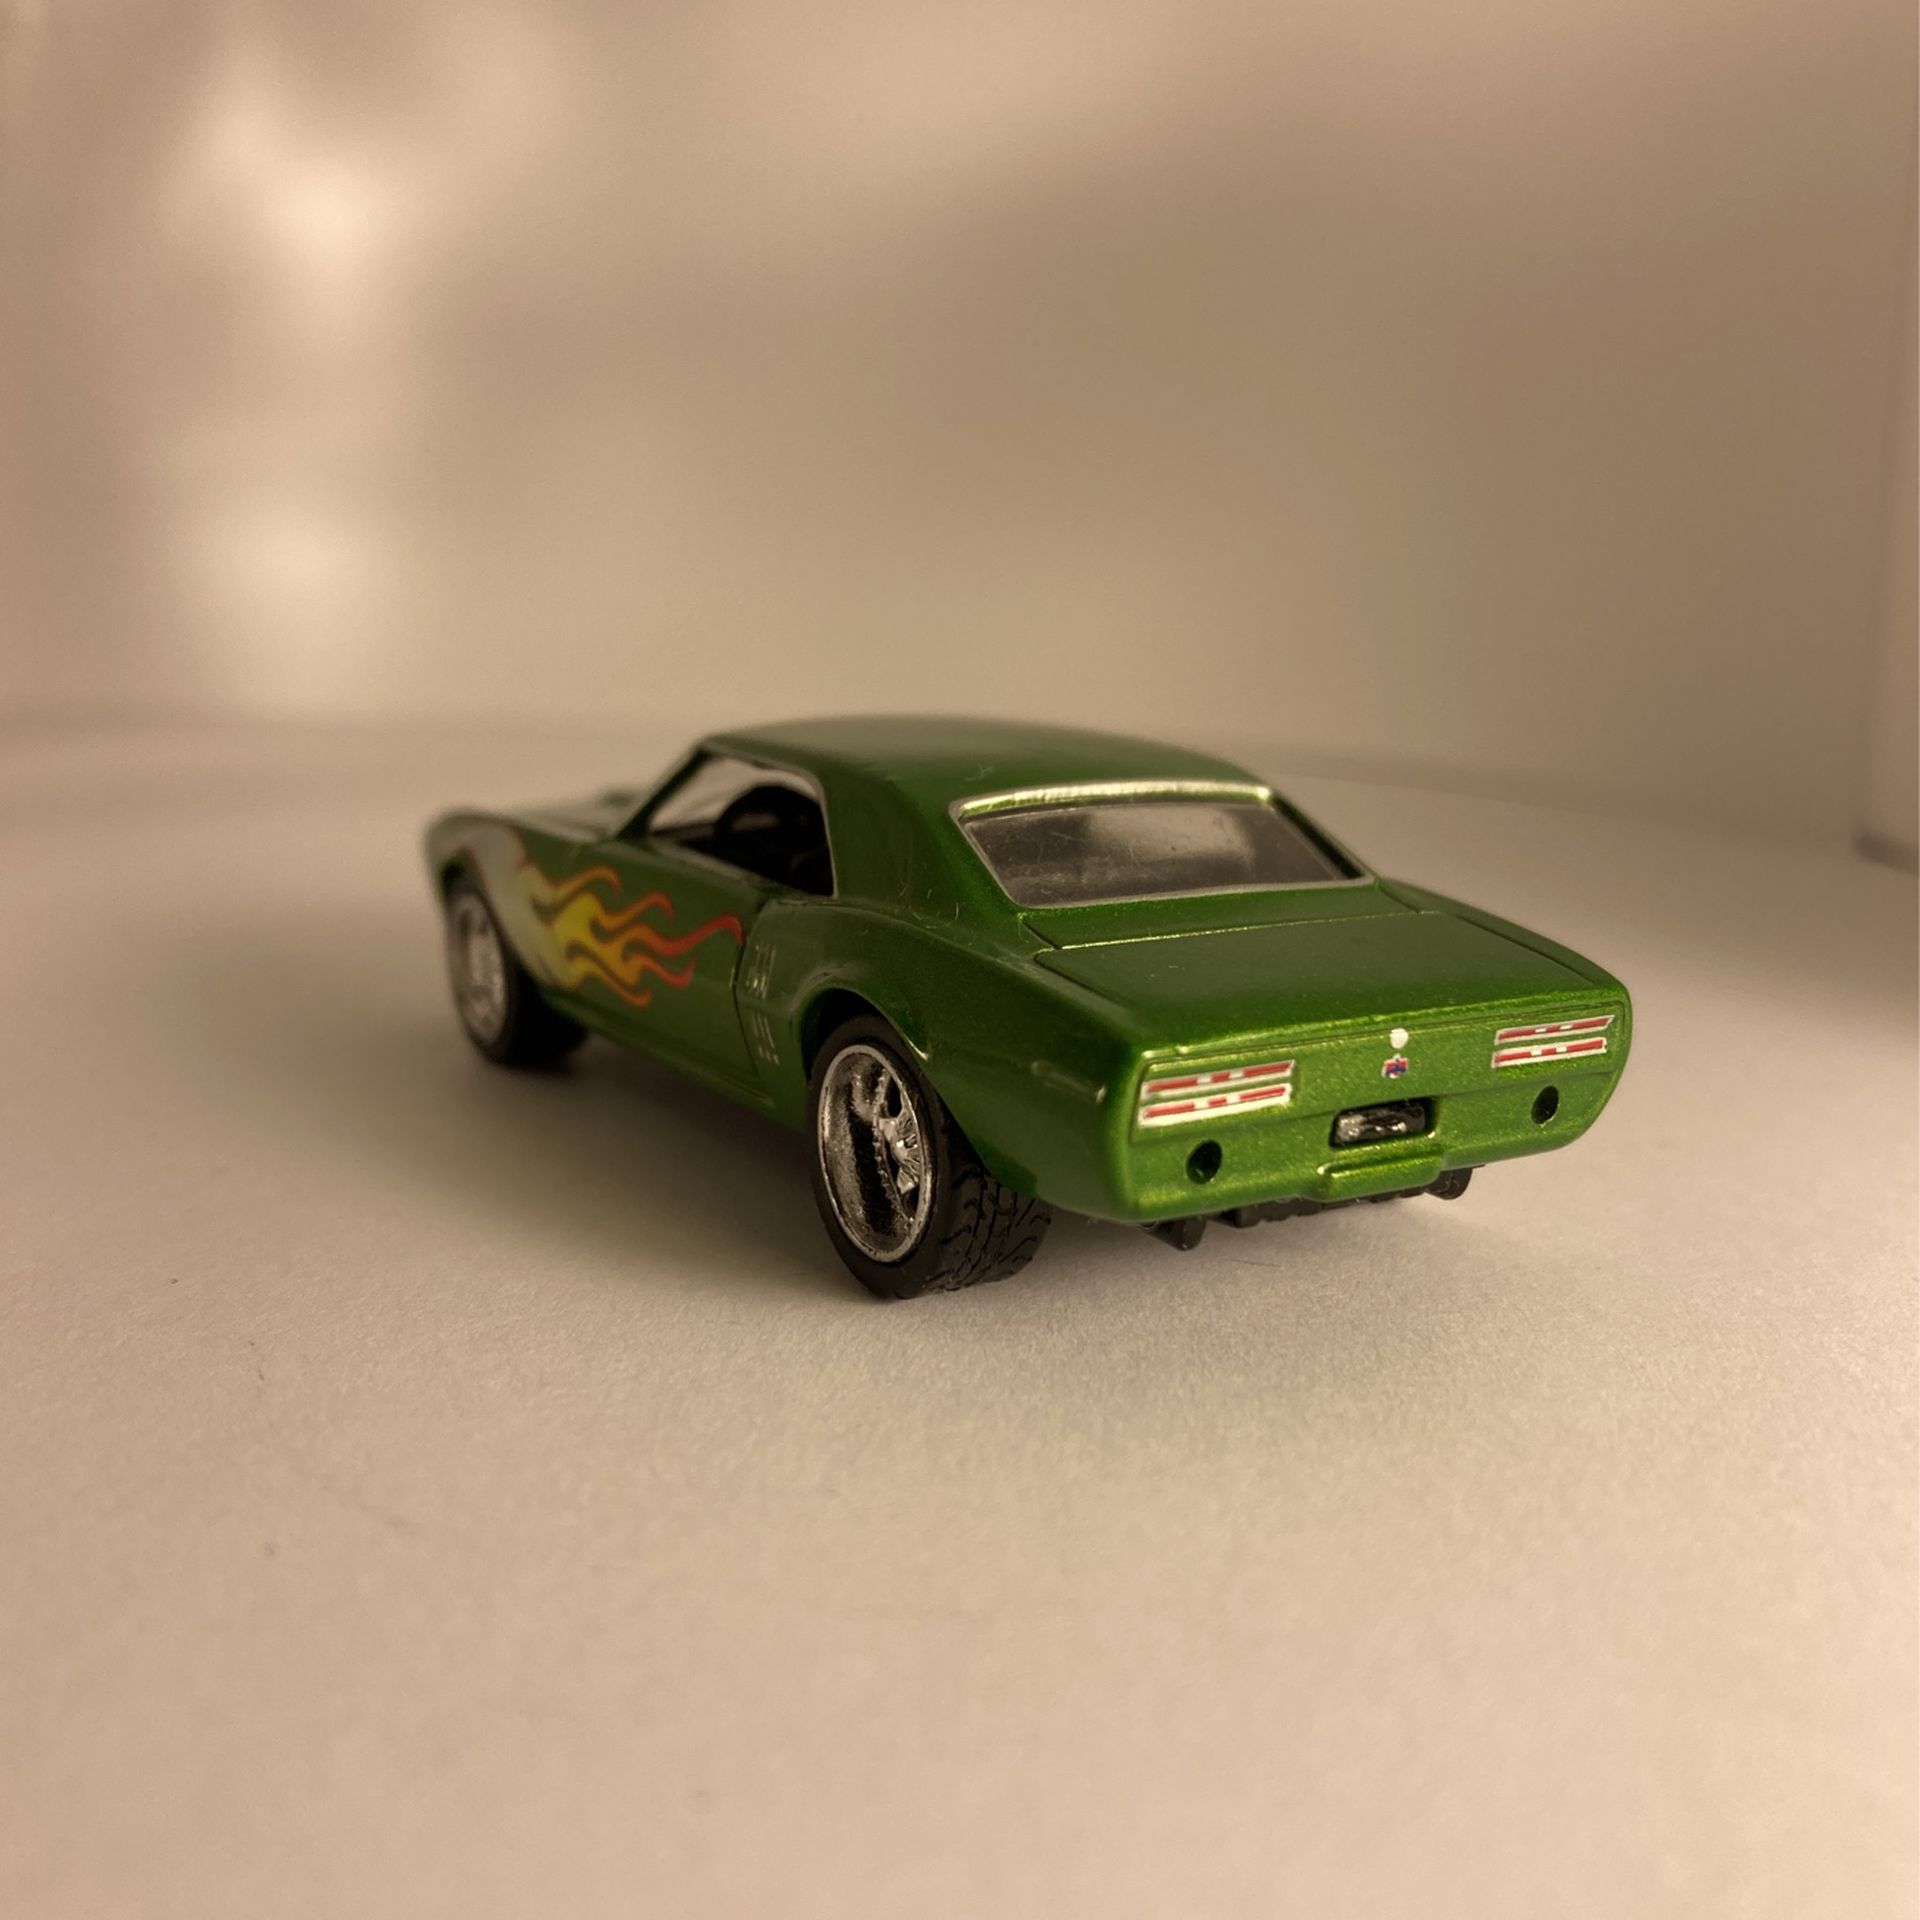 Firebird GTA Toy Model Car Kit for Sale in Cleveland, OH - OfferUp